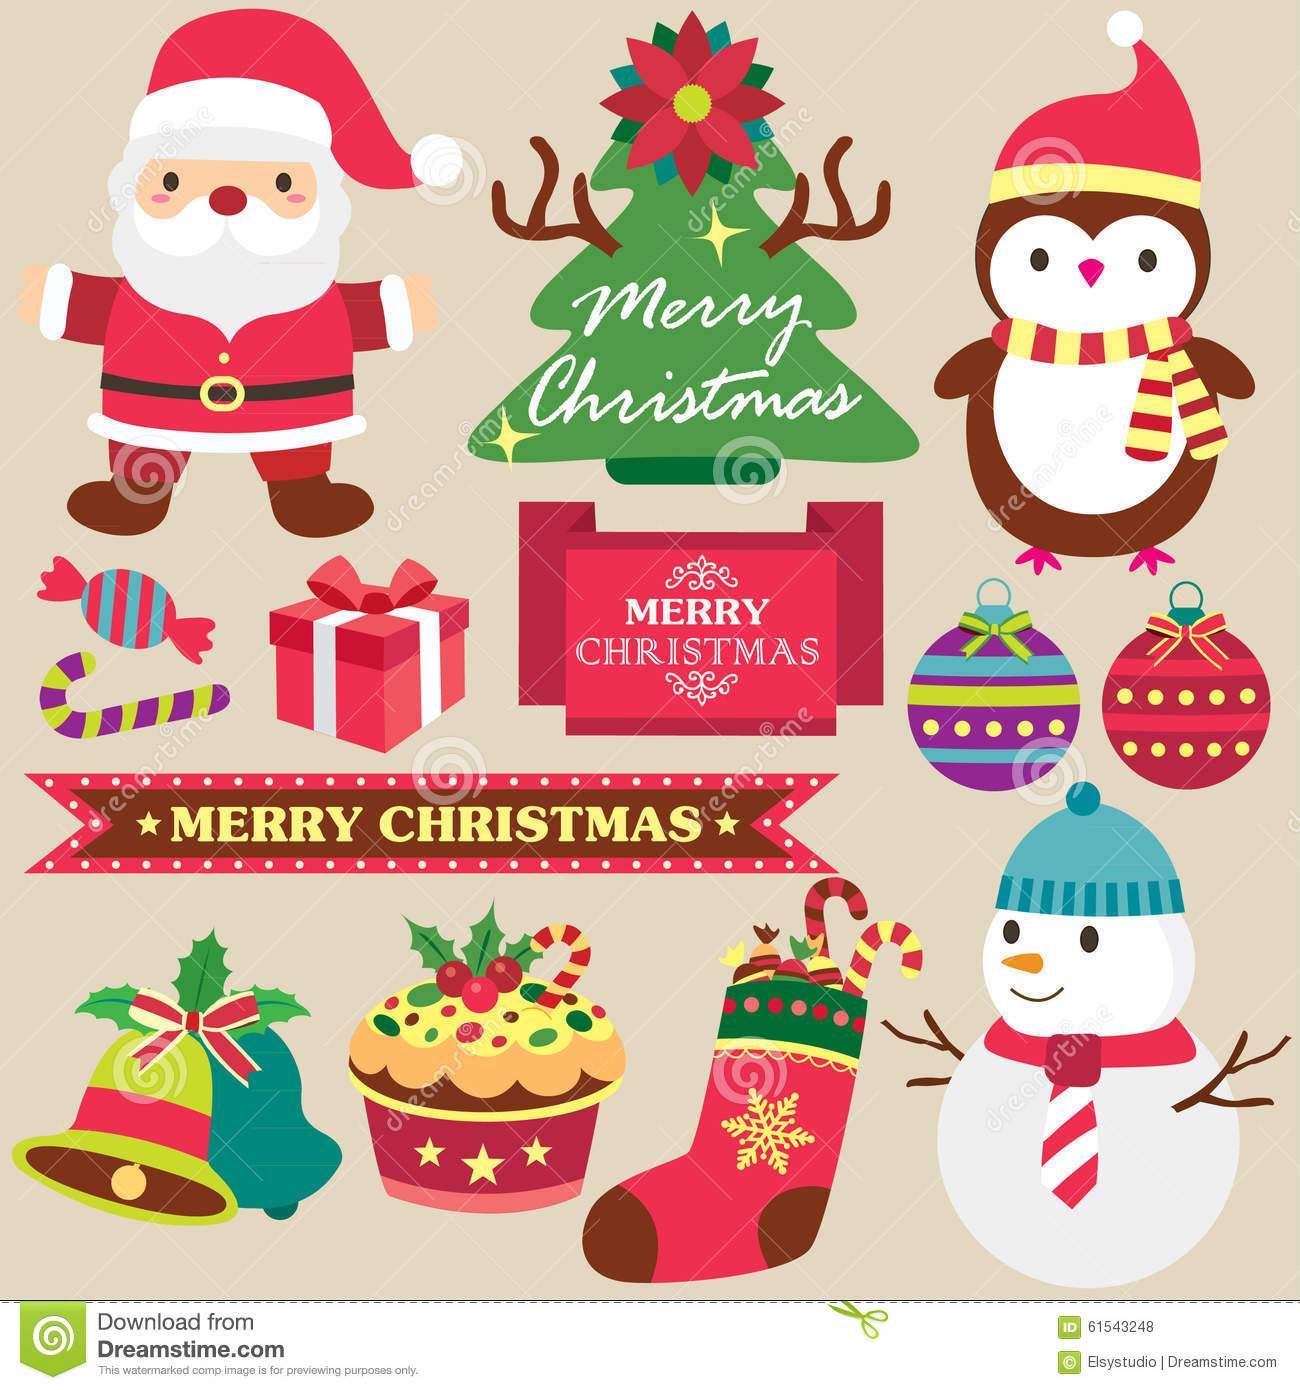 Free clipart of christmas themes.